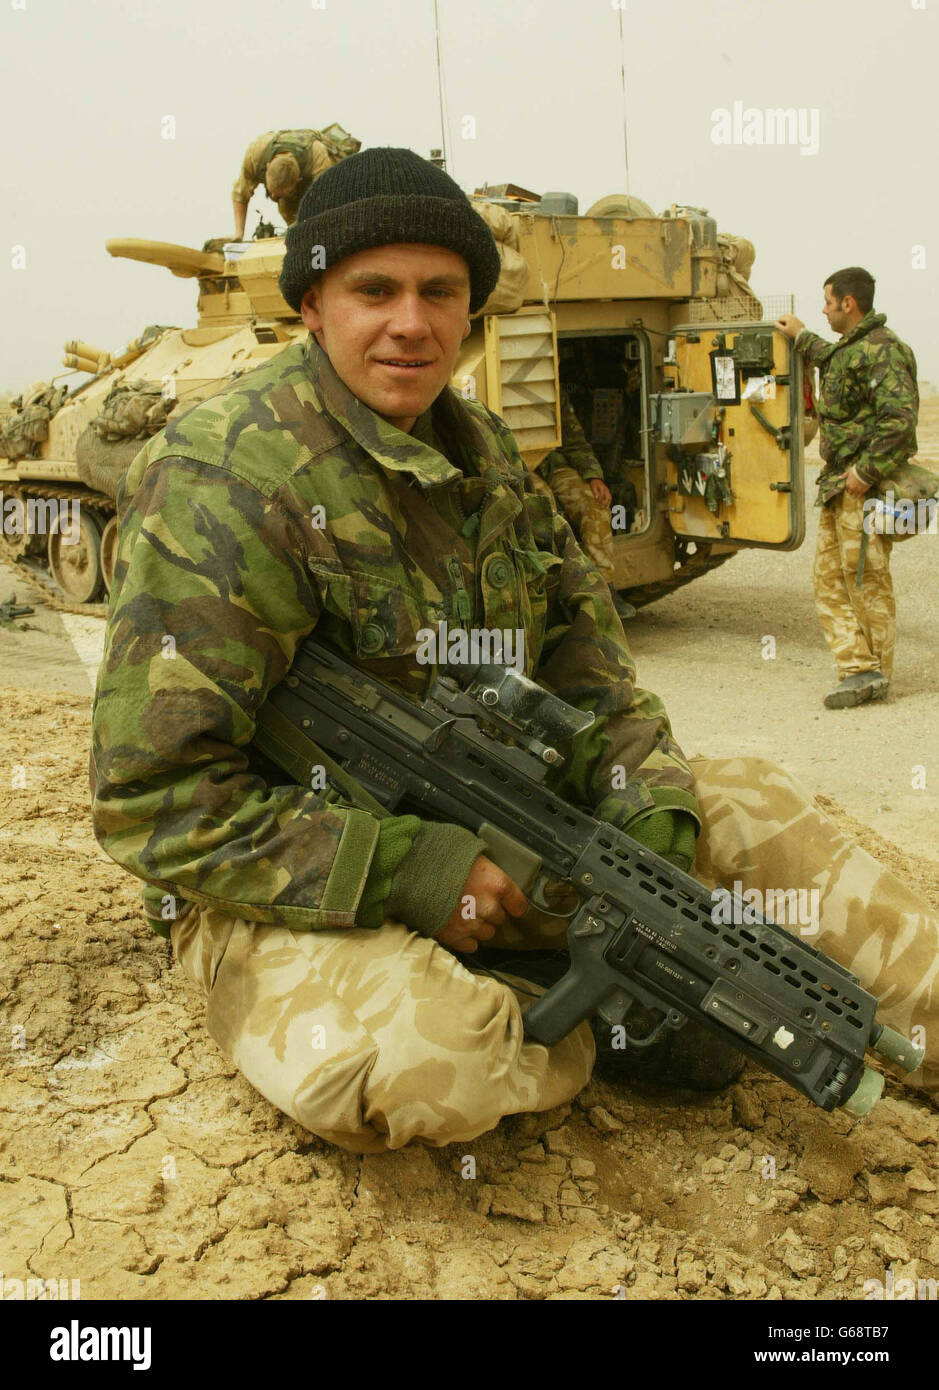 Rick Walker, 21, Queen's Dragoon Guards, on the front line south of Basra, Iraq. Stock Photo